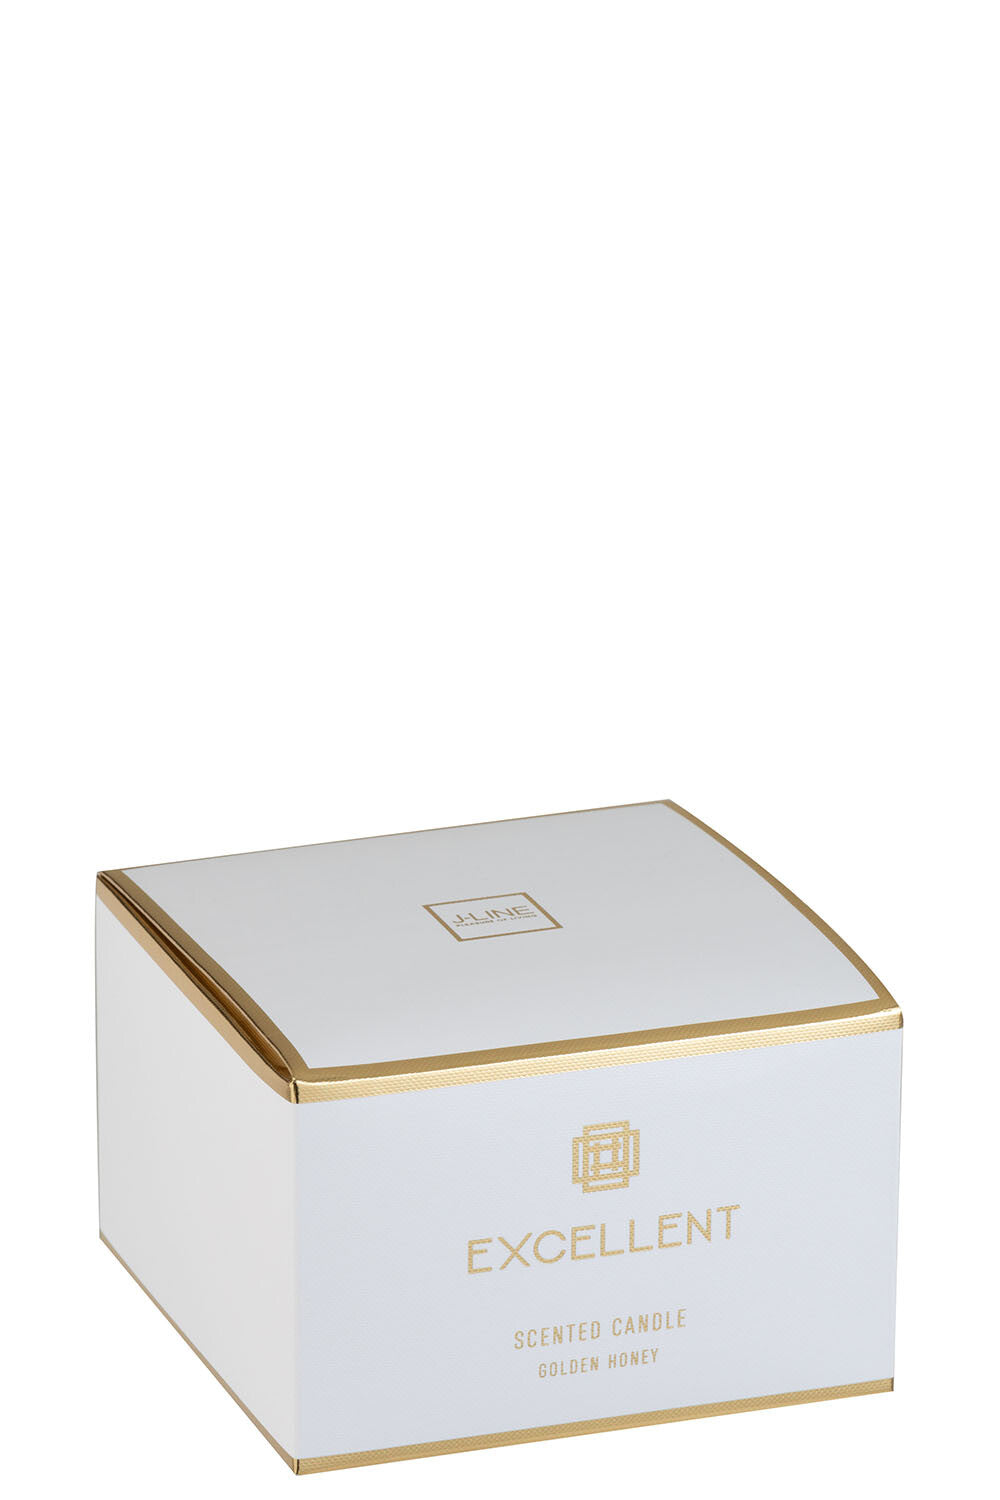 SCENTED CANDLE EXCELLENT GOLDEN HONEY GOLD LARGE-40HOURS